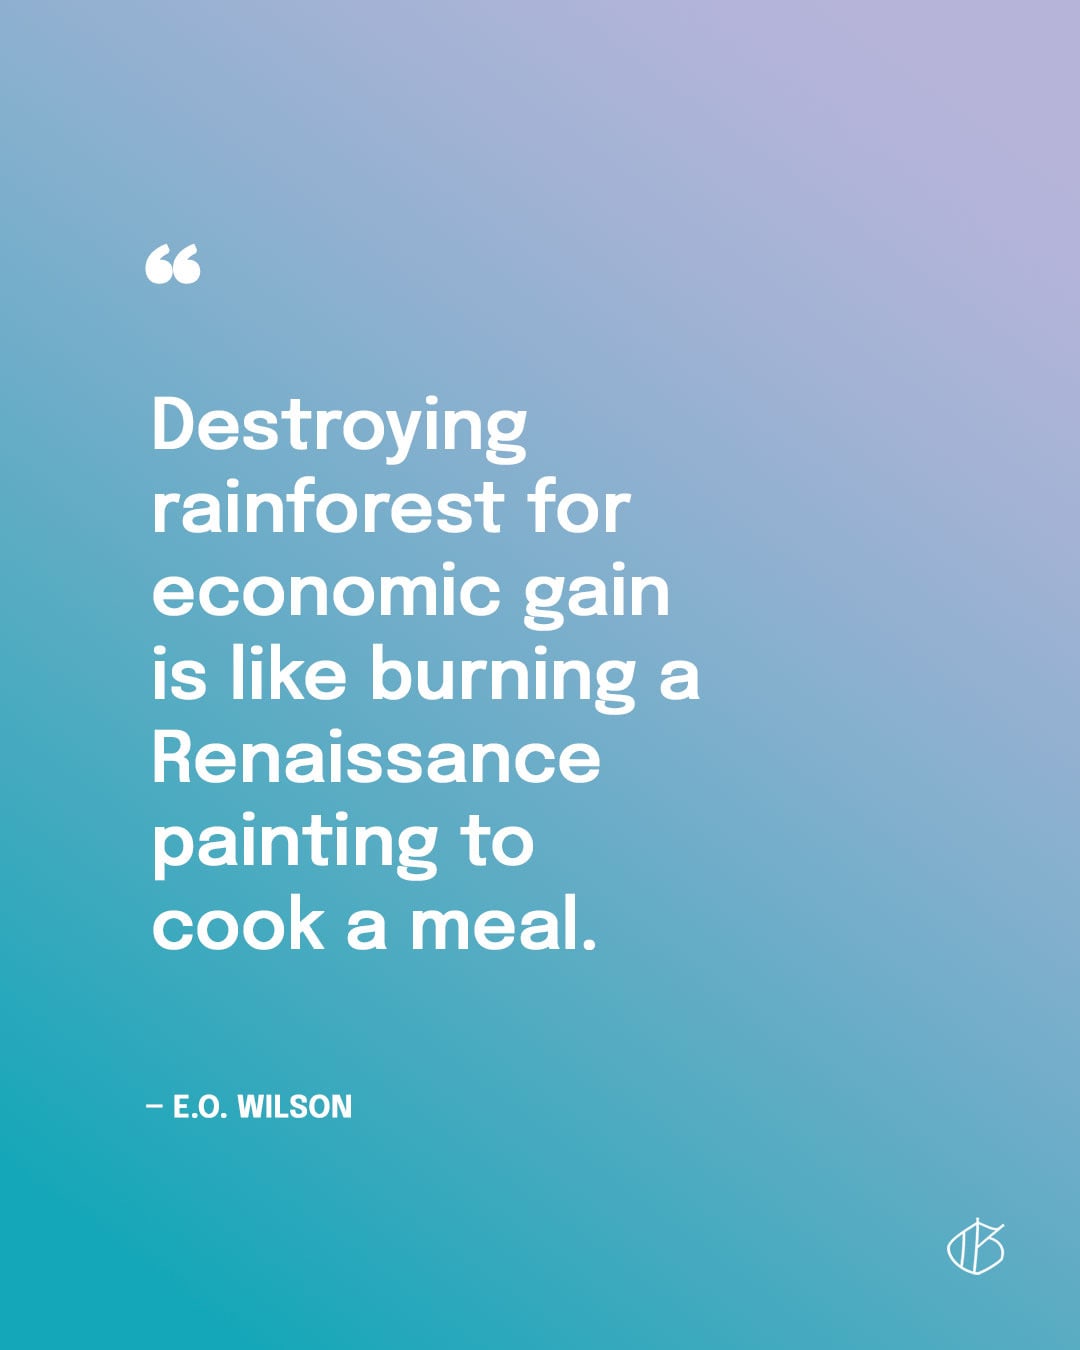 “Destroying rainforest for economic gain is like burning a Renaissance painting to cook a meal.” — E.O. Wilson quote